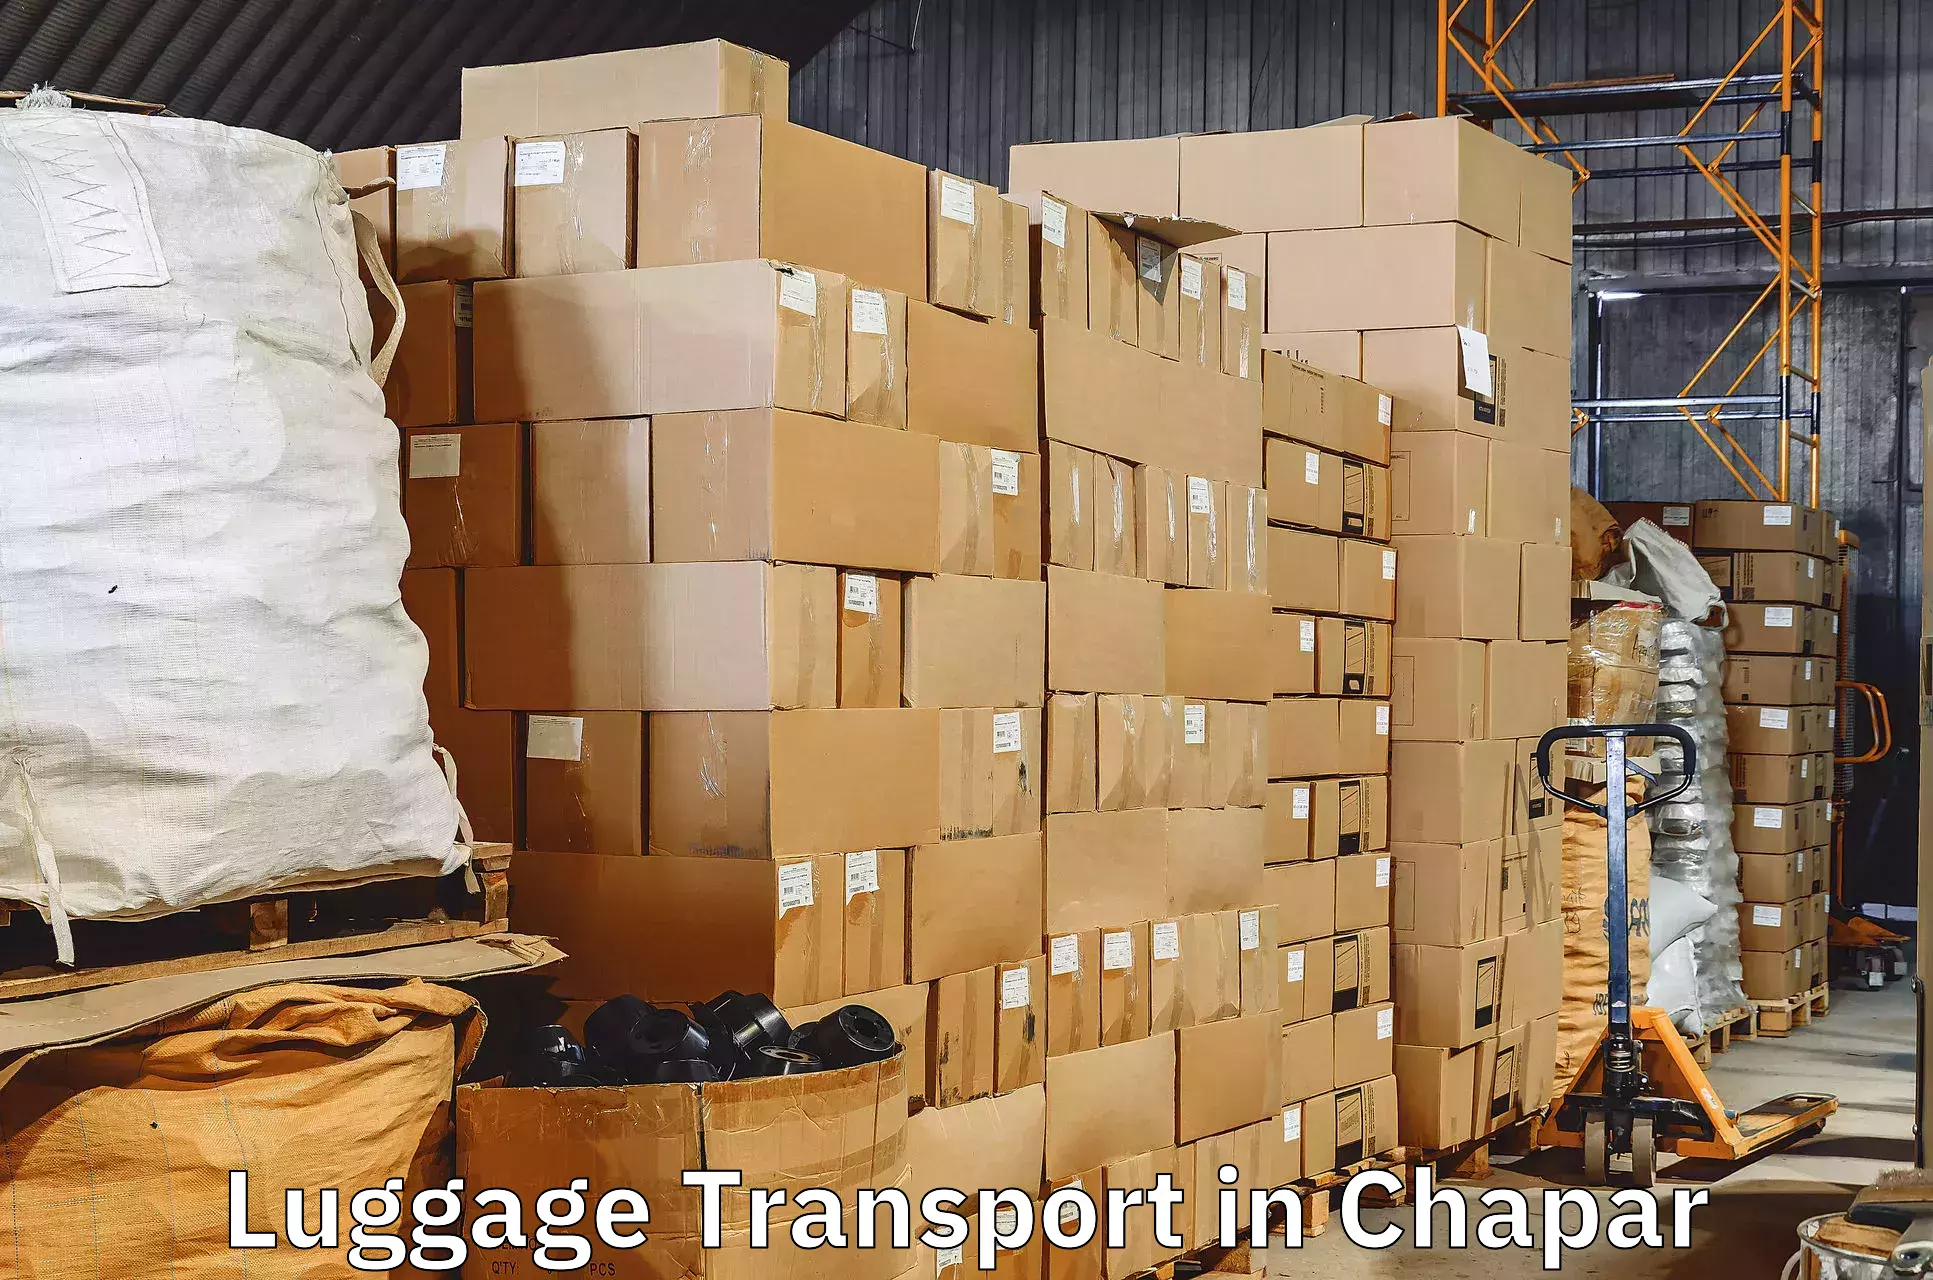 Luggage transport solutions in Chapar